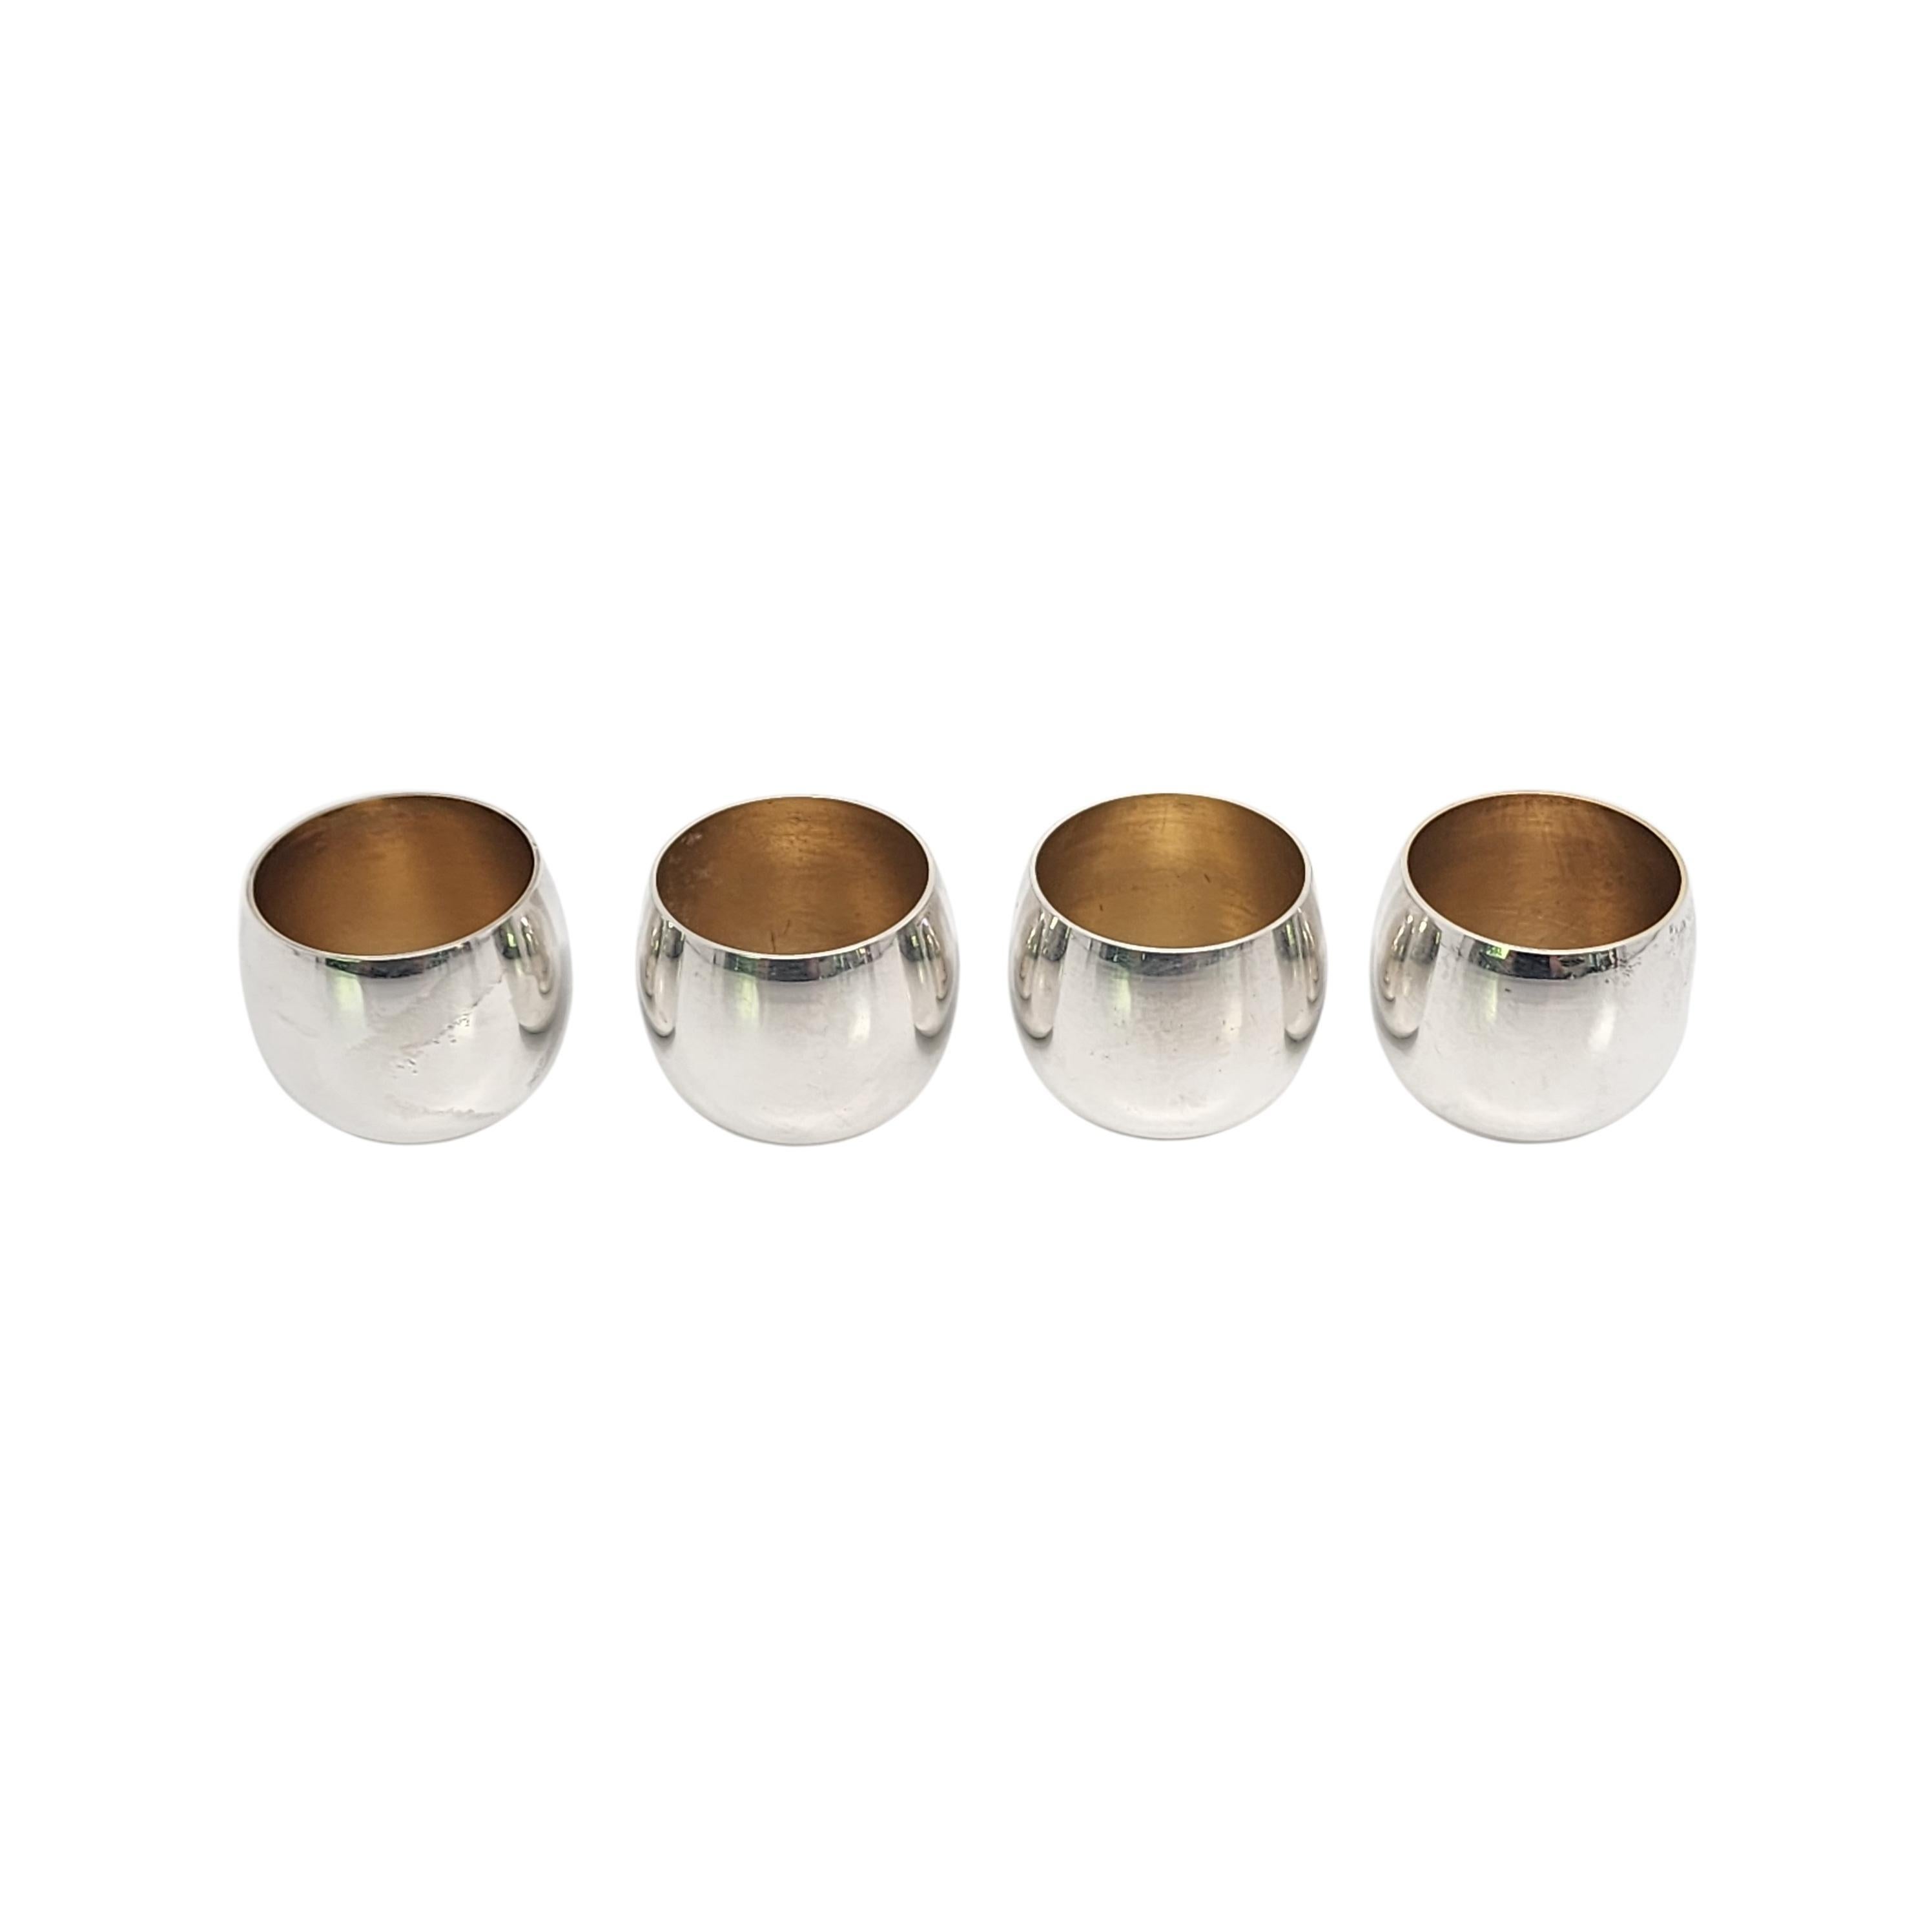 Set of 4 Tiffany & Co Makers sterling silver shot/cordial cups with pouches and box.

No monogram or engraving.

Round design with a smooth polished finish and a gold wash interior. Includes 4 vintage pouches and red Tiffany & Co vintage cardboard